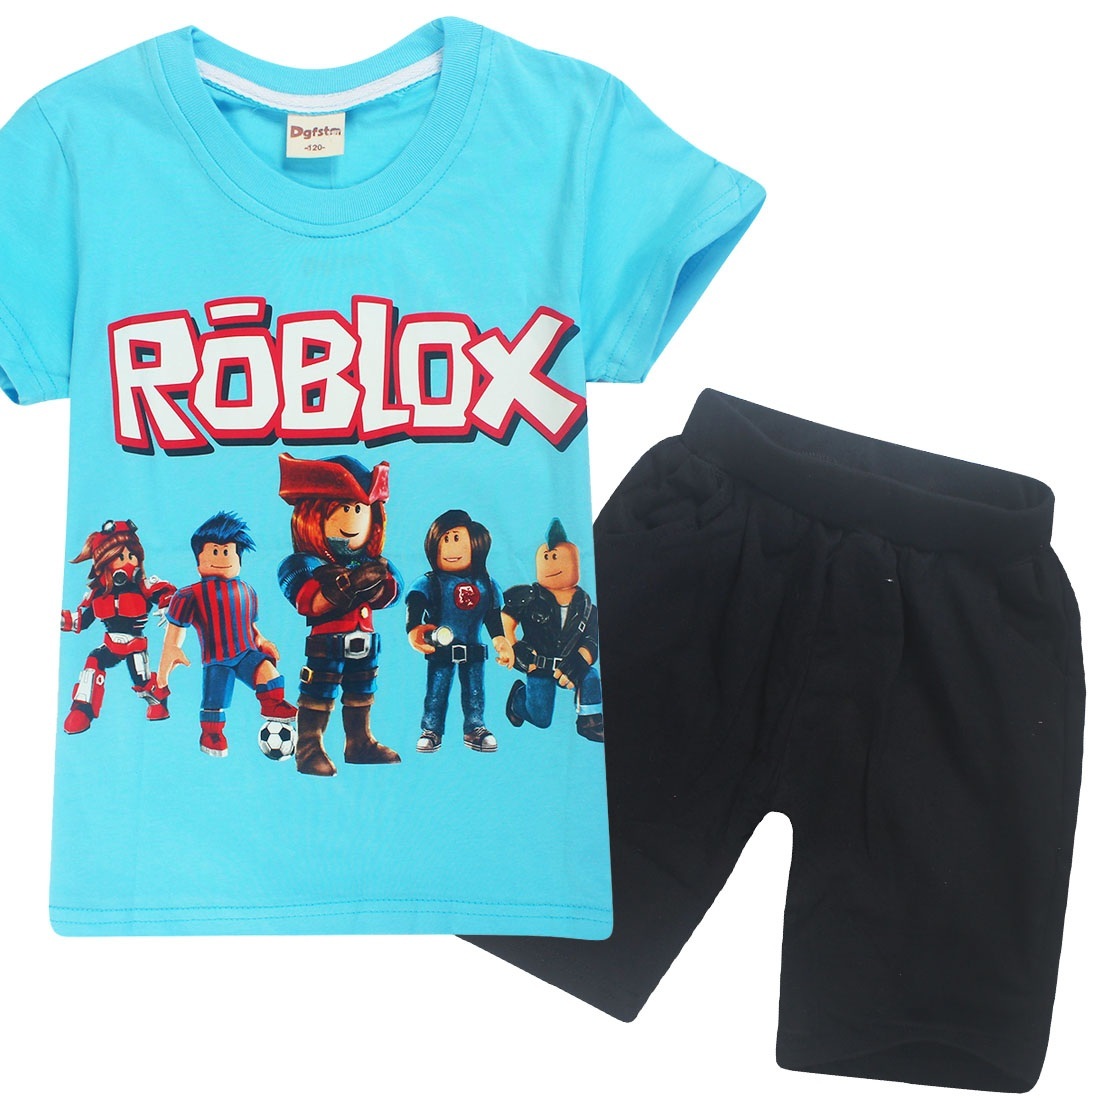 Roblox Theme New Arrival Green Kids T Shirt And Similar Items - baby roblox size